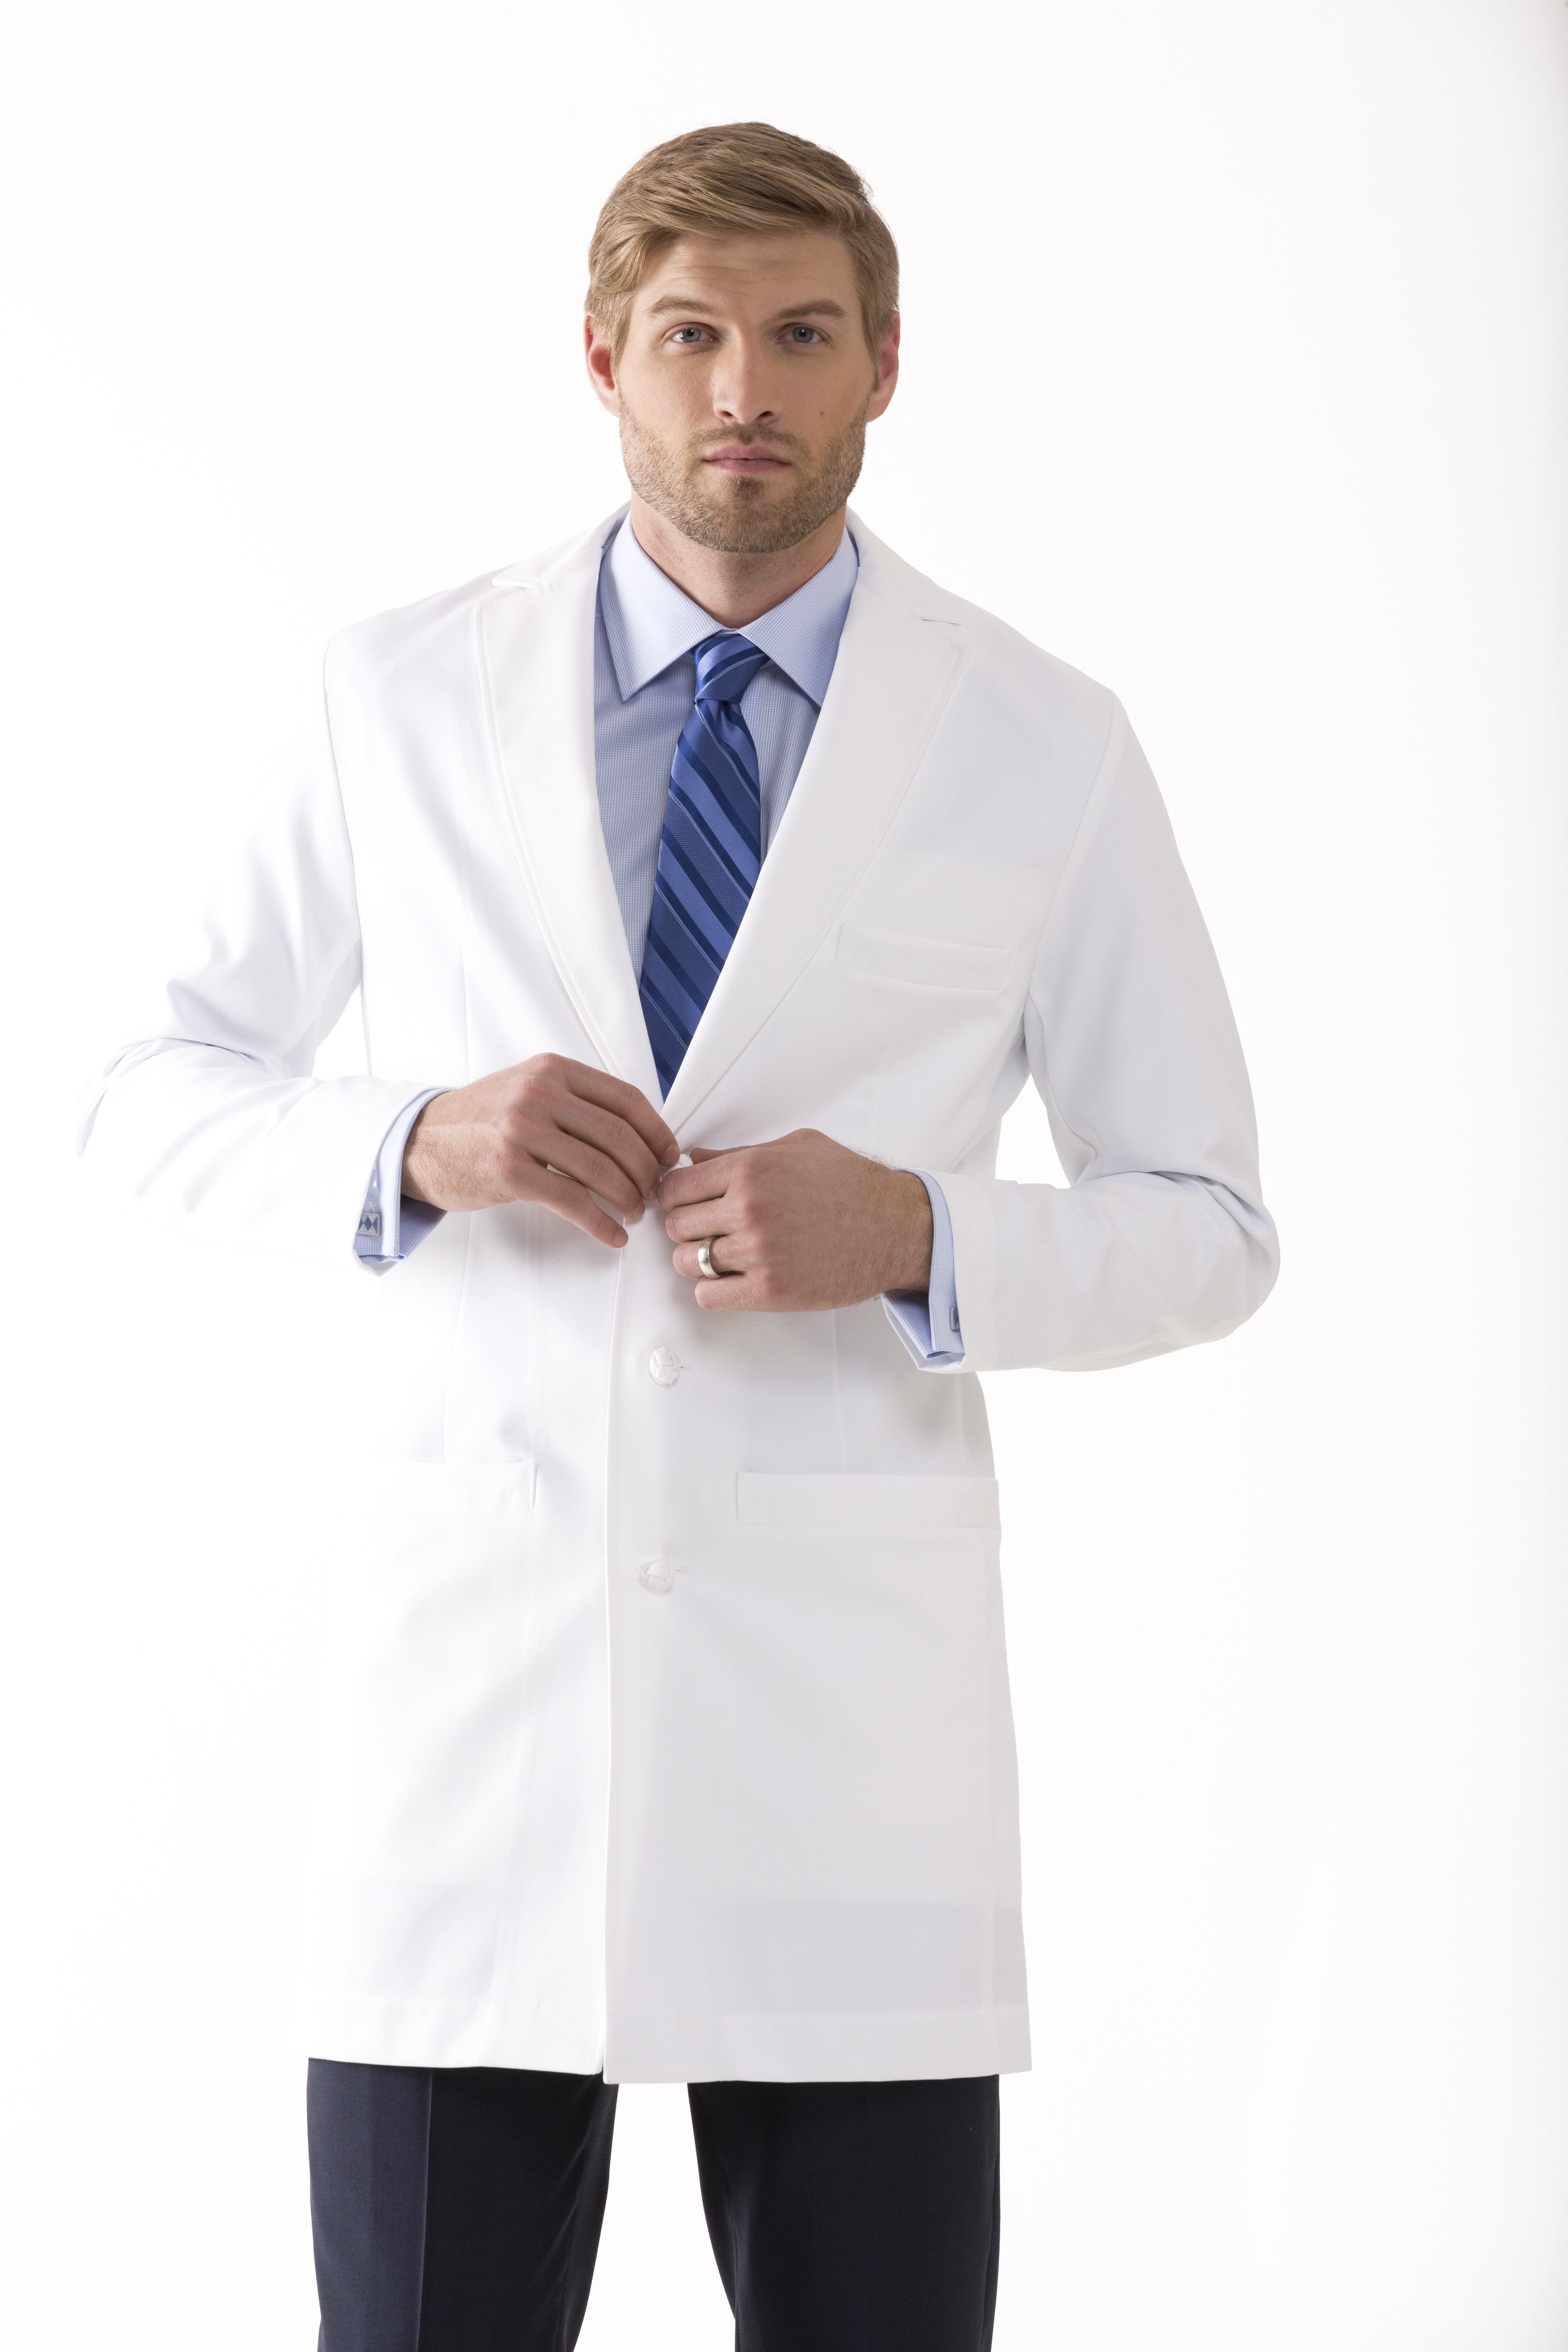 What Is The Name Of The White Coats Doctors Wear | Han Coats